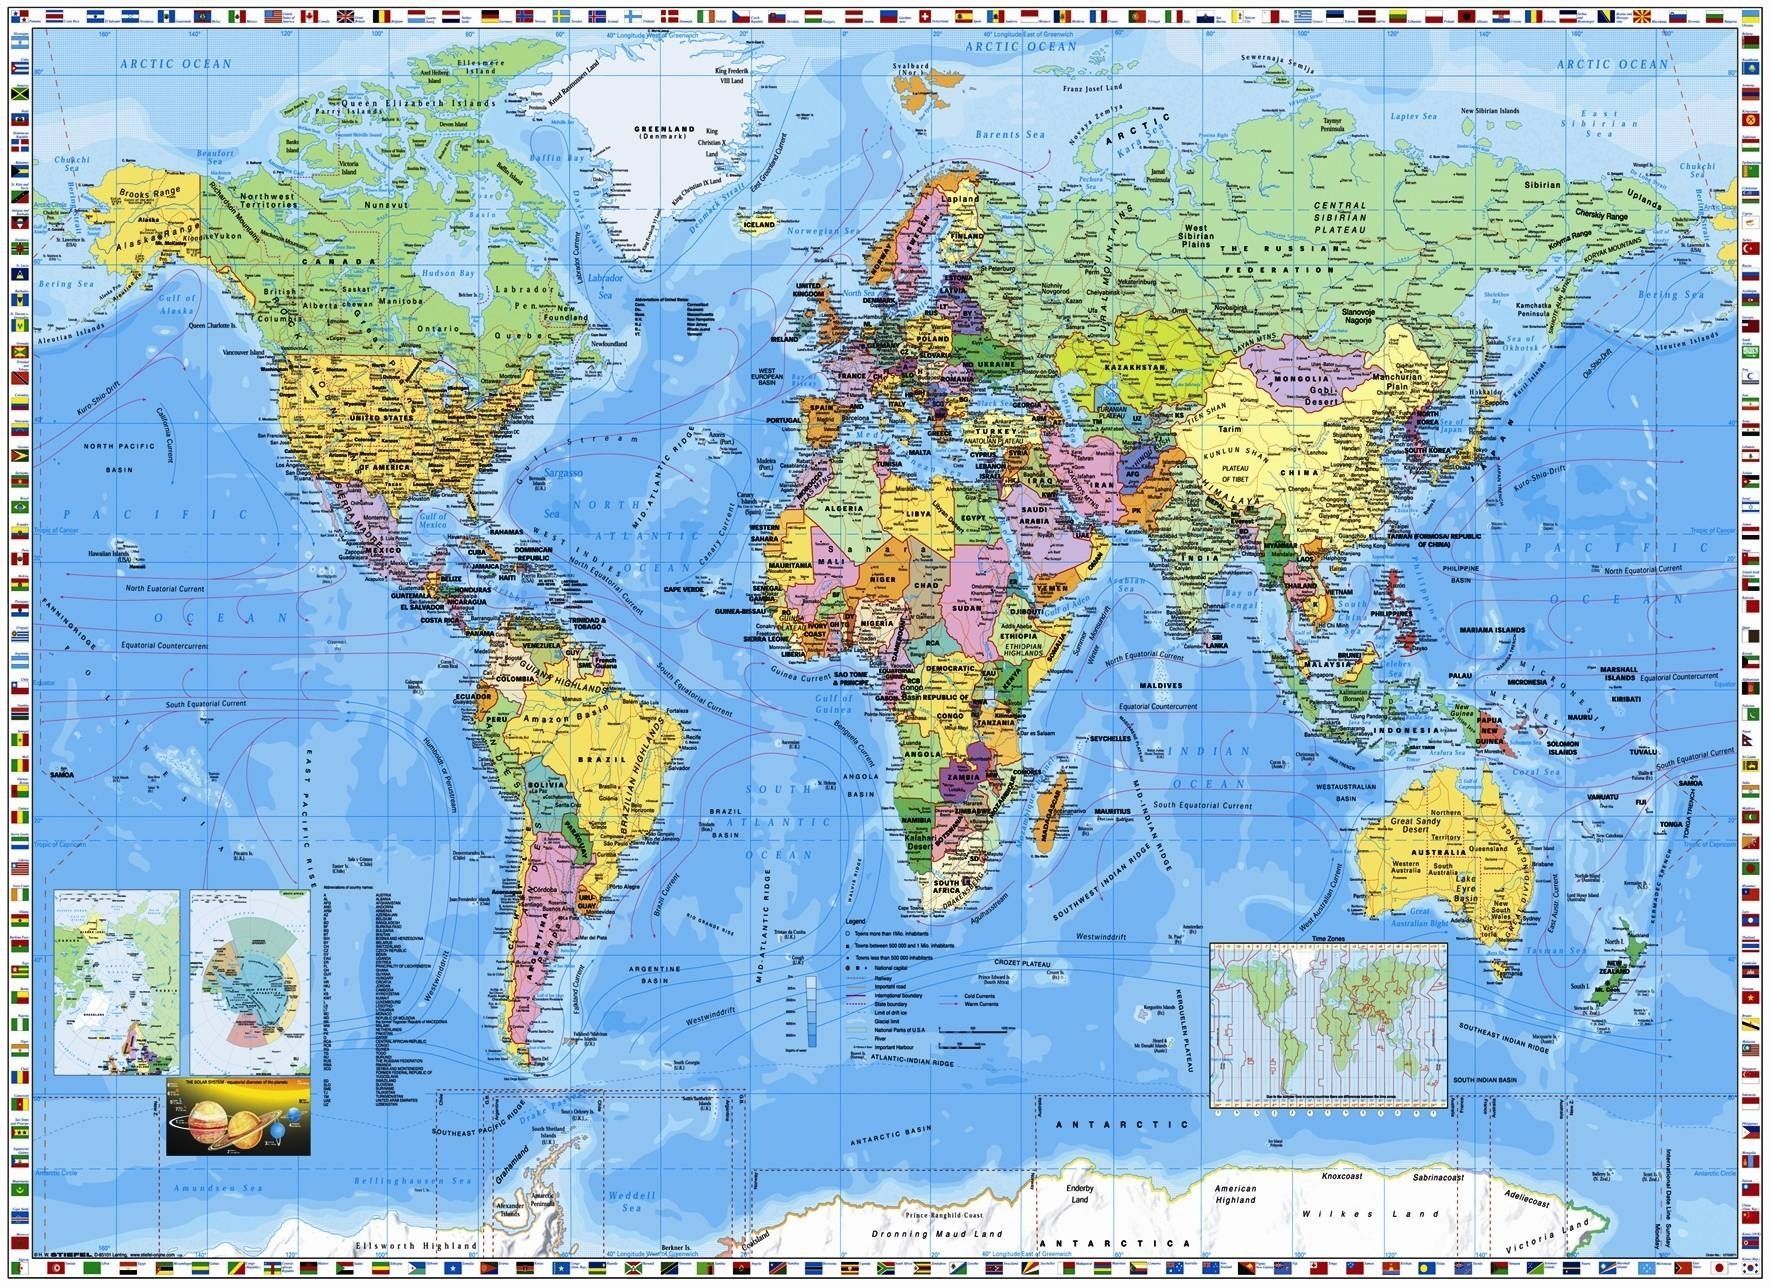 Best World Map High Resolution Free FULL HD 1080p For PC Background. Cool world map, World map wallpaper, World map mural